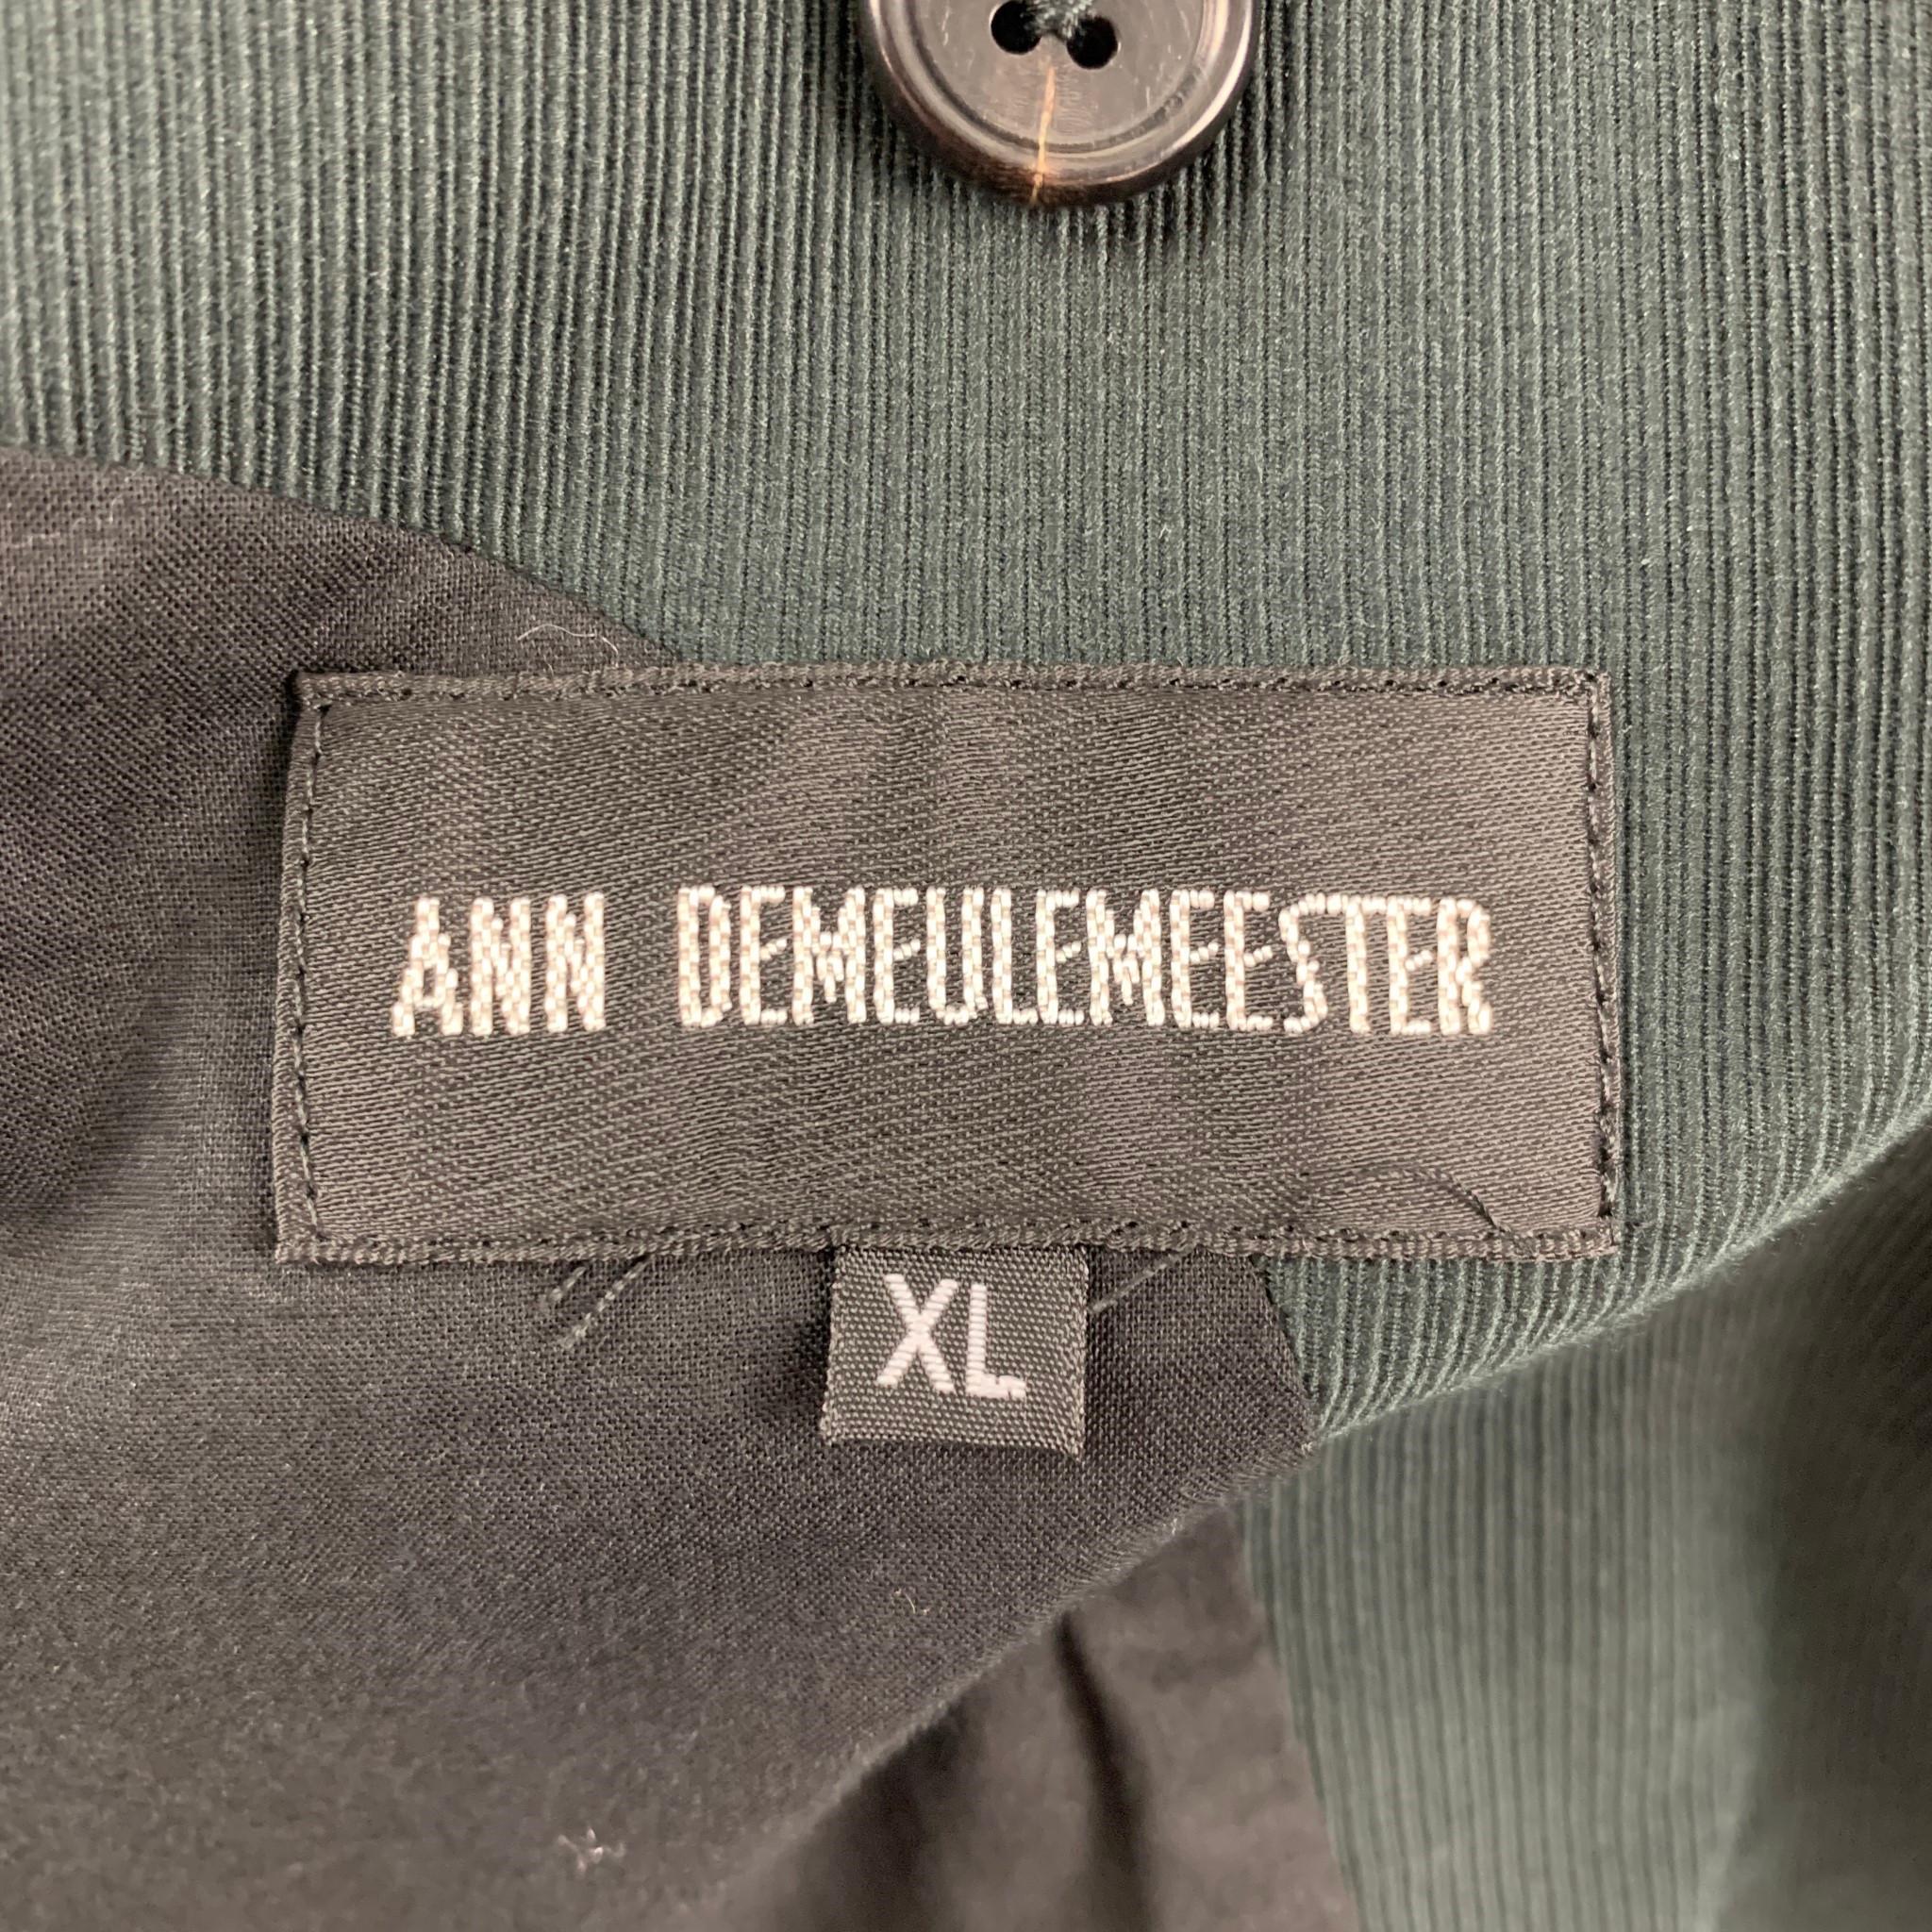 ANN DEMEULEMEESTER coat comes in a charcoal cotton with a front black panel detail featuring a peak lapel, front pockets, full liner, back slit, buttoned sleeve design, and a two button closure. Made in Italy. 

Very Good Pre-Owned